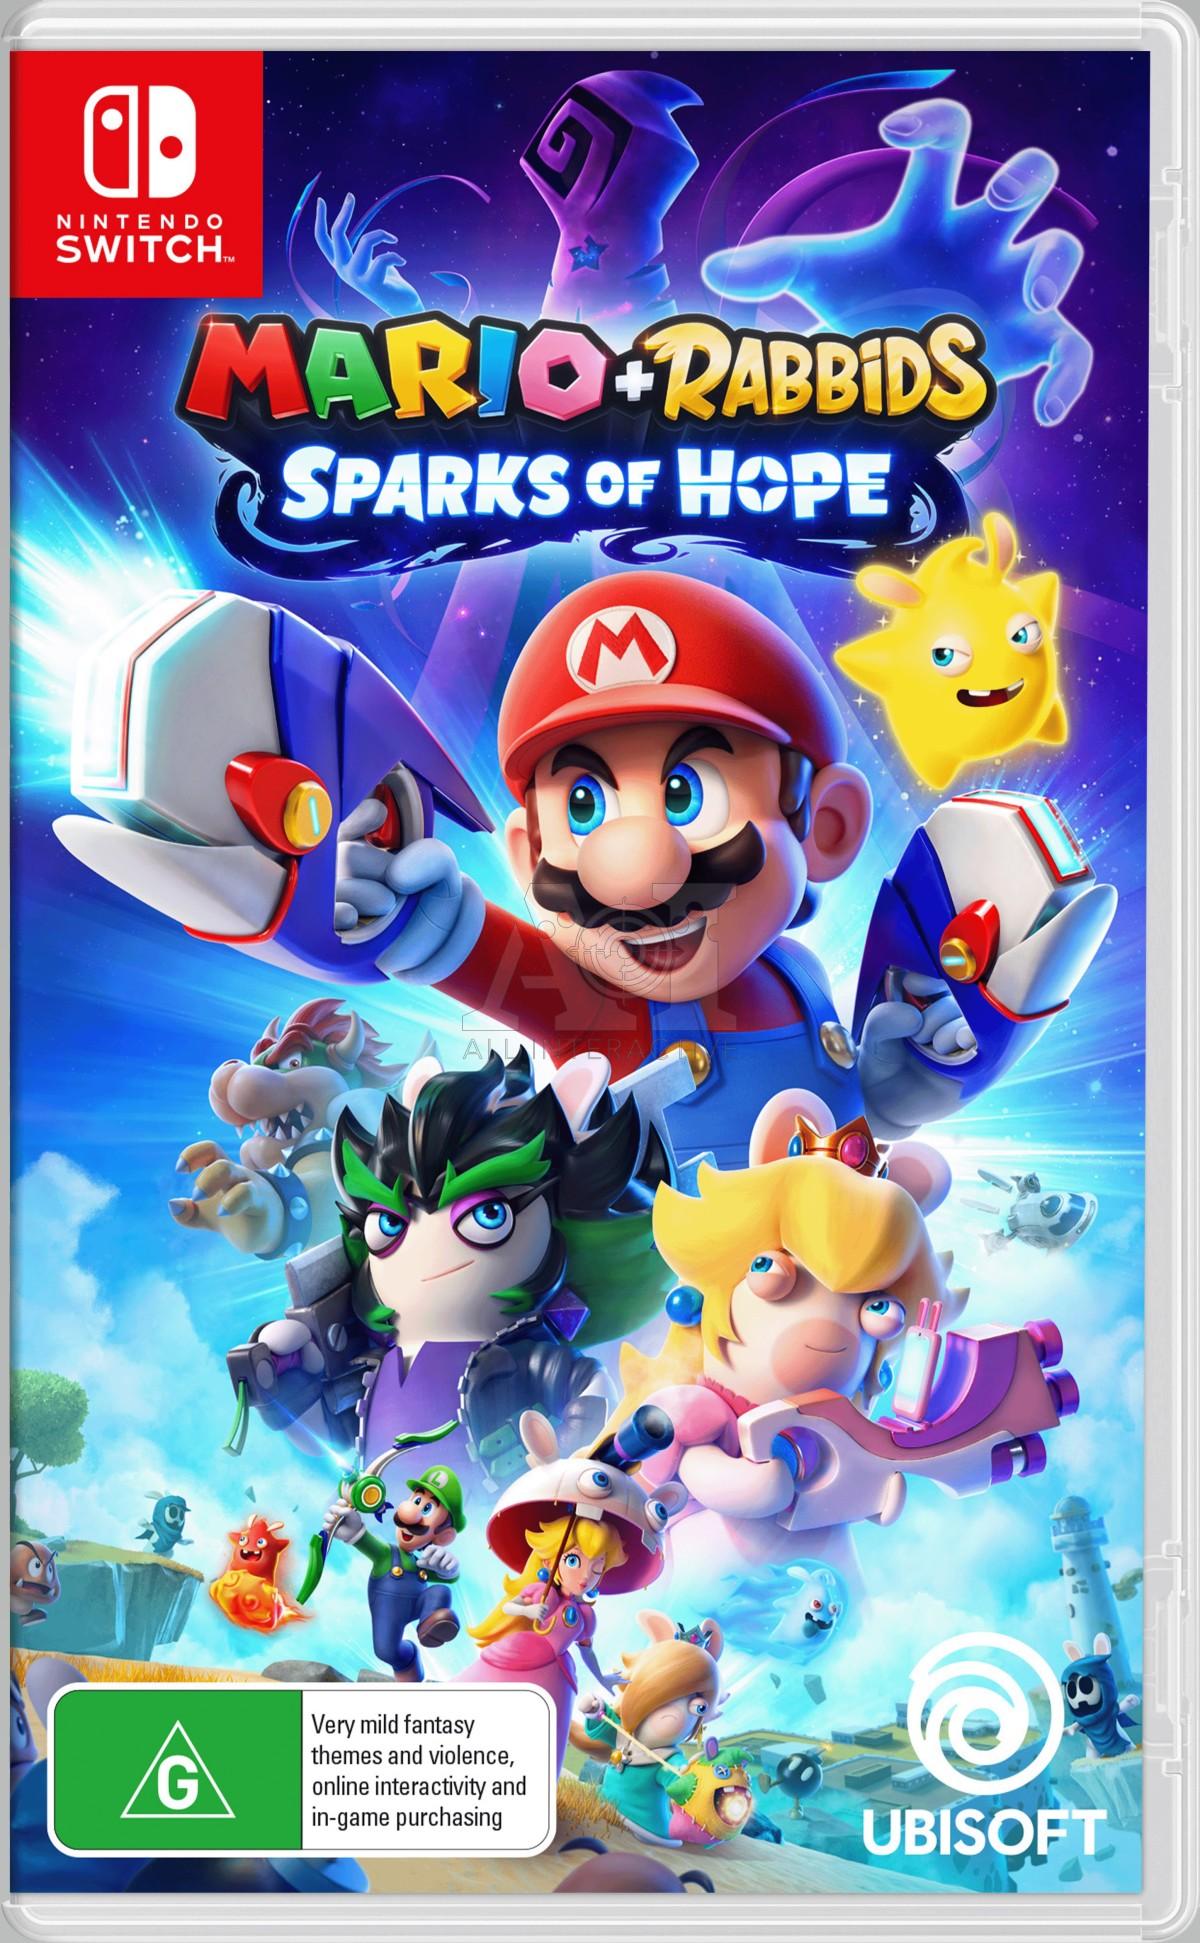 NINTENDO SWITCH MARIO AND RABBIDS SPARKS OF HOPE